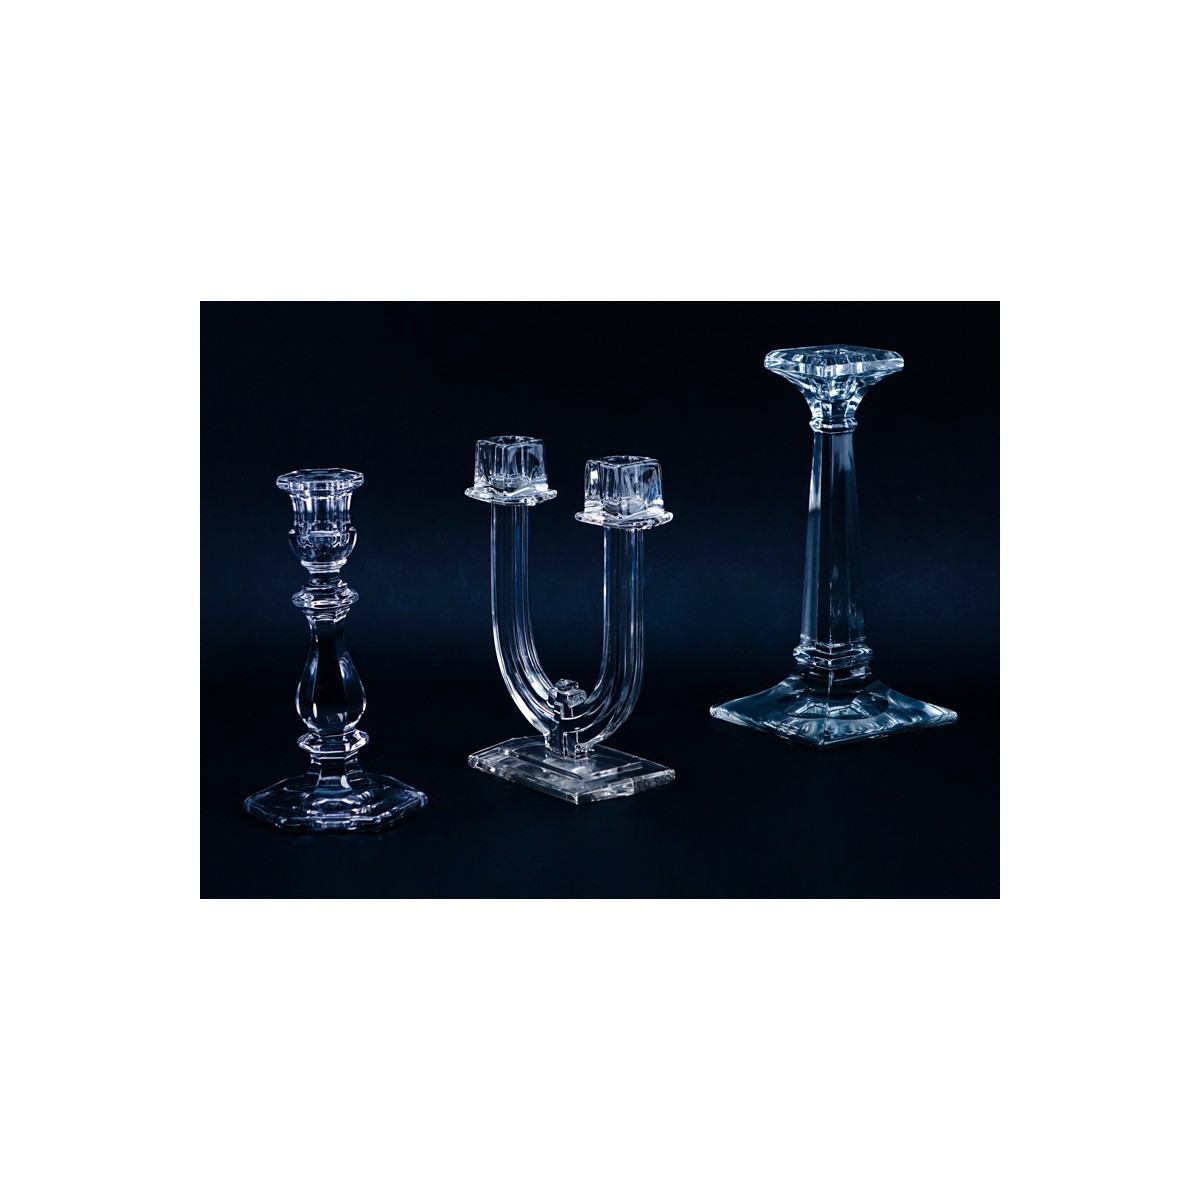 Three (3) Pairs of Heisey Glass Candlesticks in the Old Williamsburg, Aristocrat, and New Era Patte